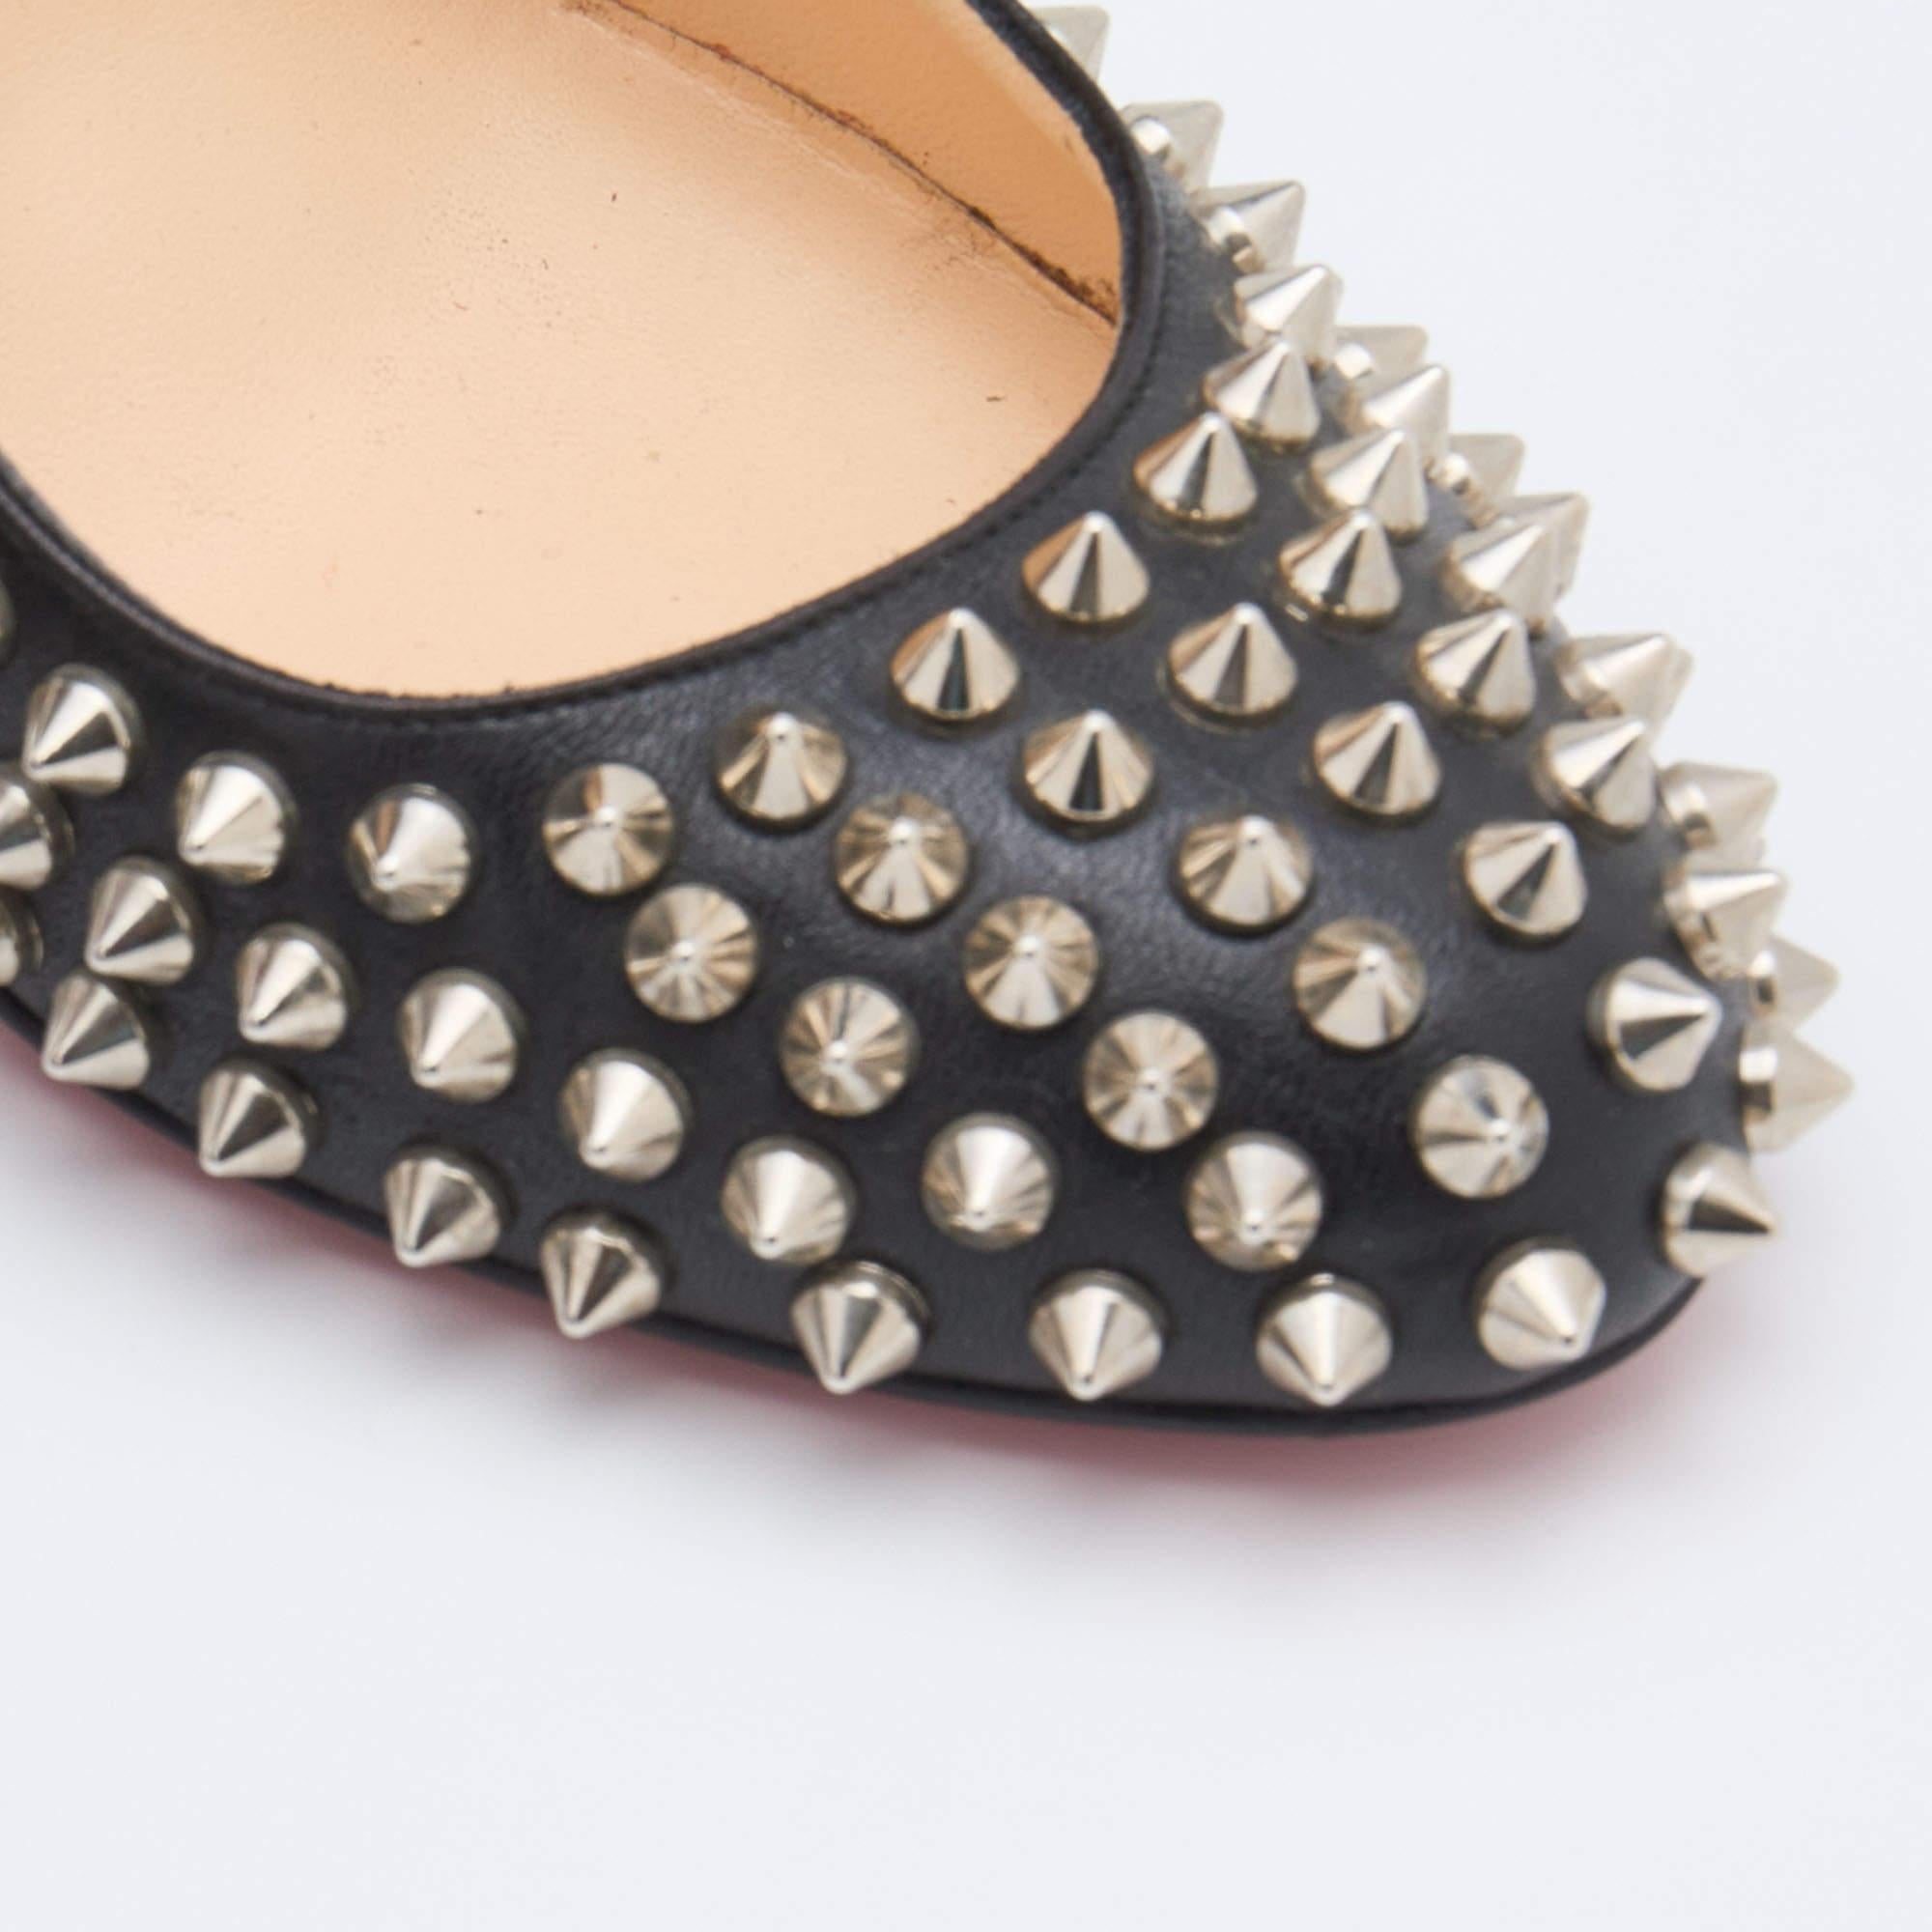 Christian Louboutin Black Leather Fifi Spike Round Toe Pumps Size 37 For Sale 1